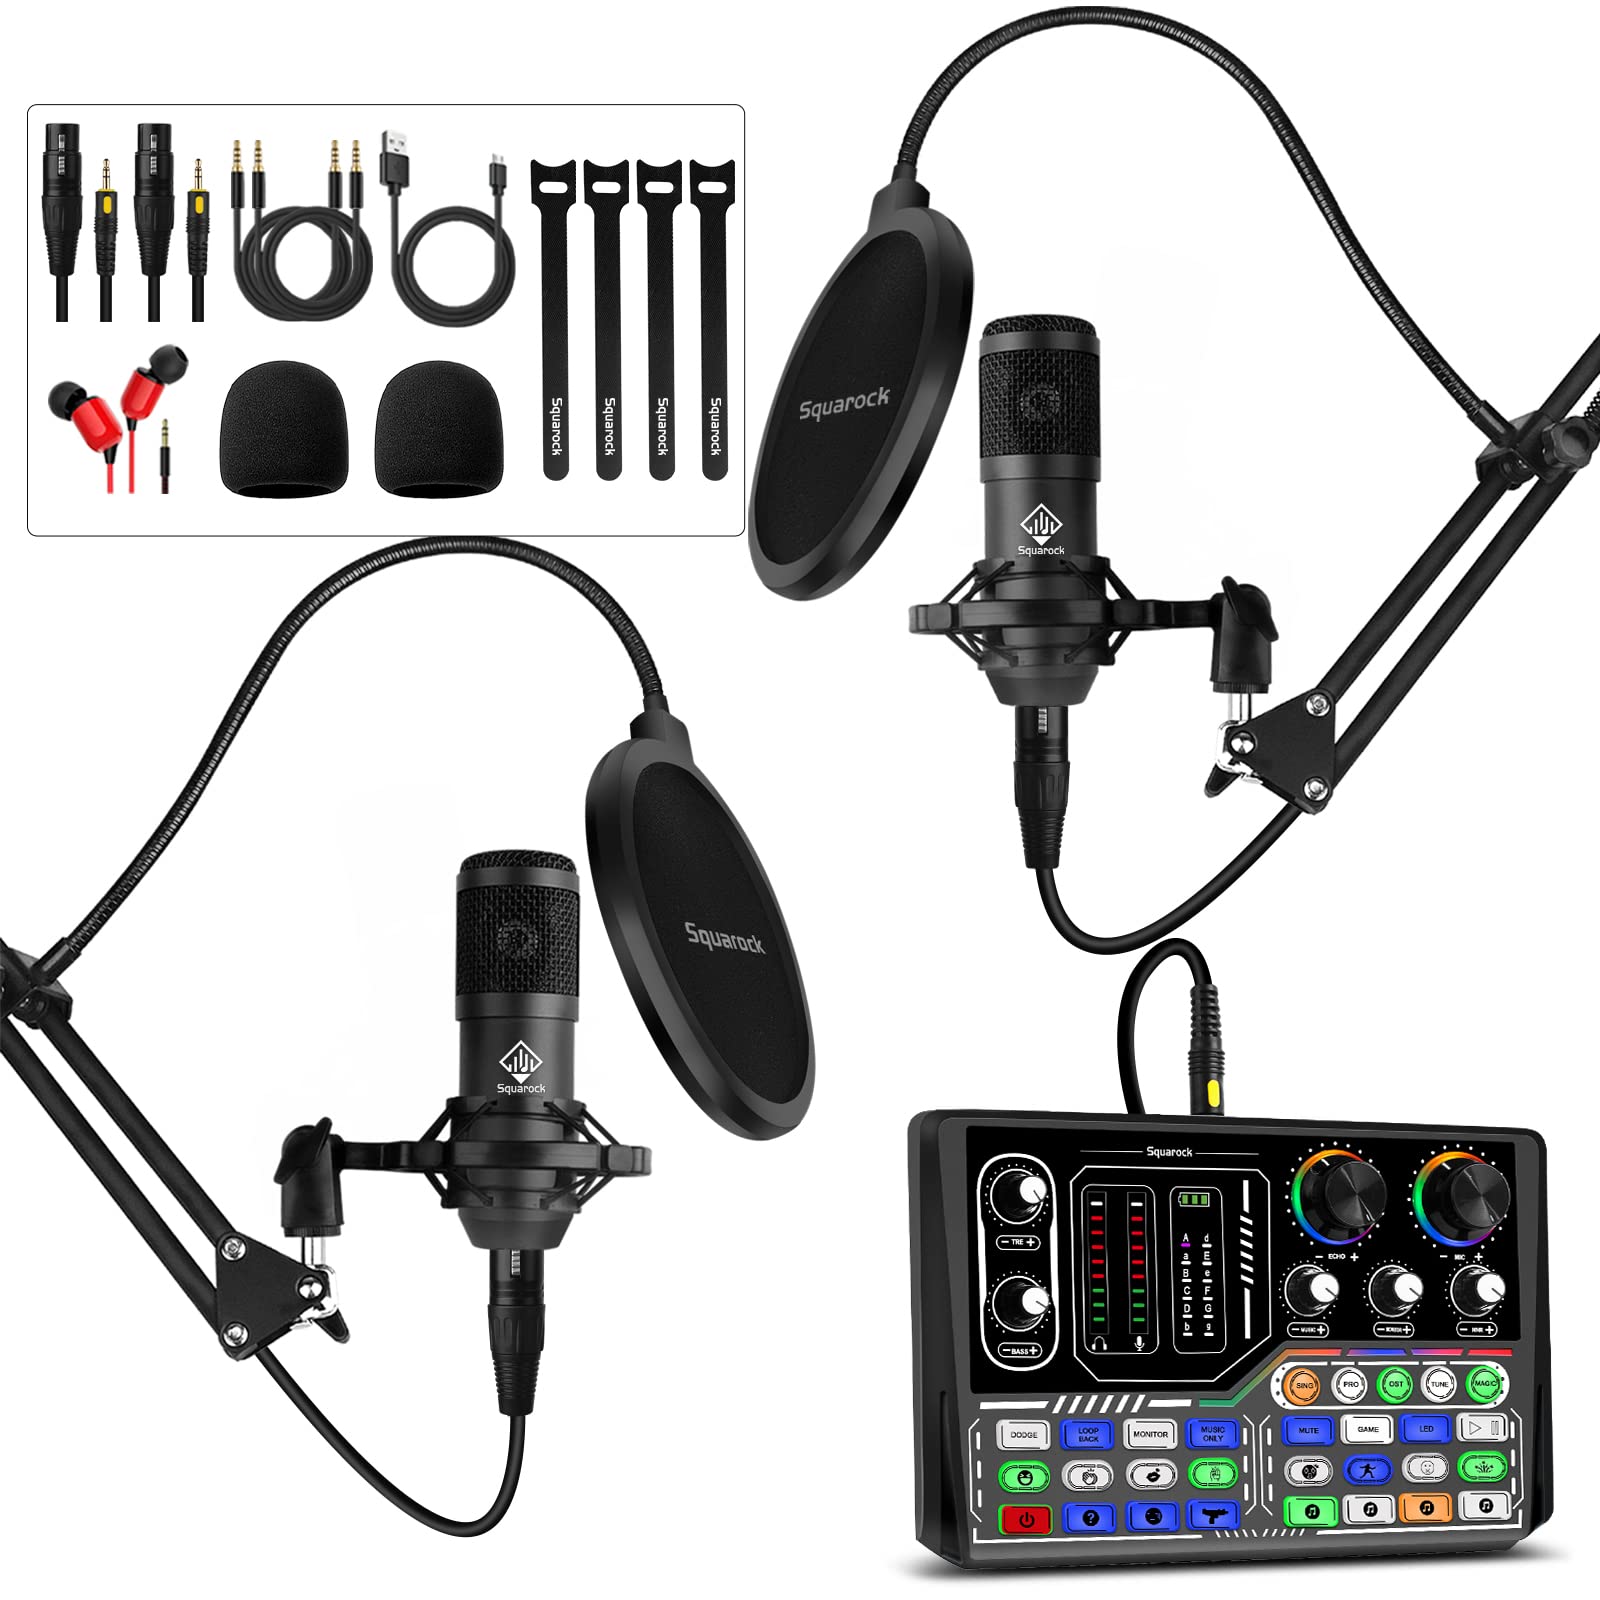 Podcast Equipment Bundle for 2 - Audio Interface Dj Equipment with Condenser Microphone for Podcast Recording Gaming YouTube